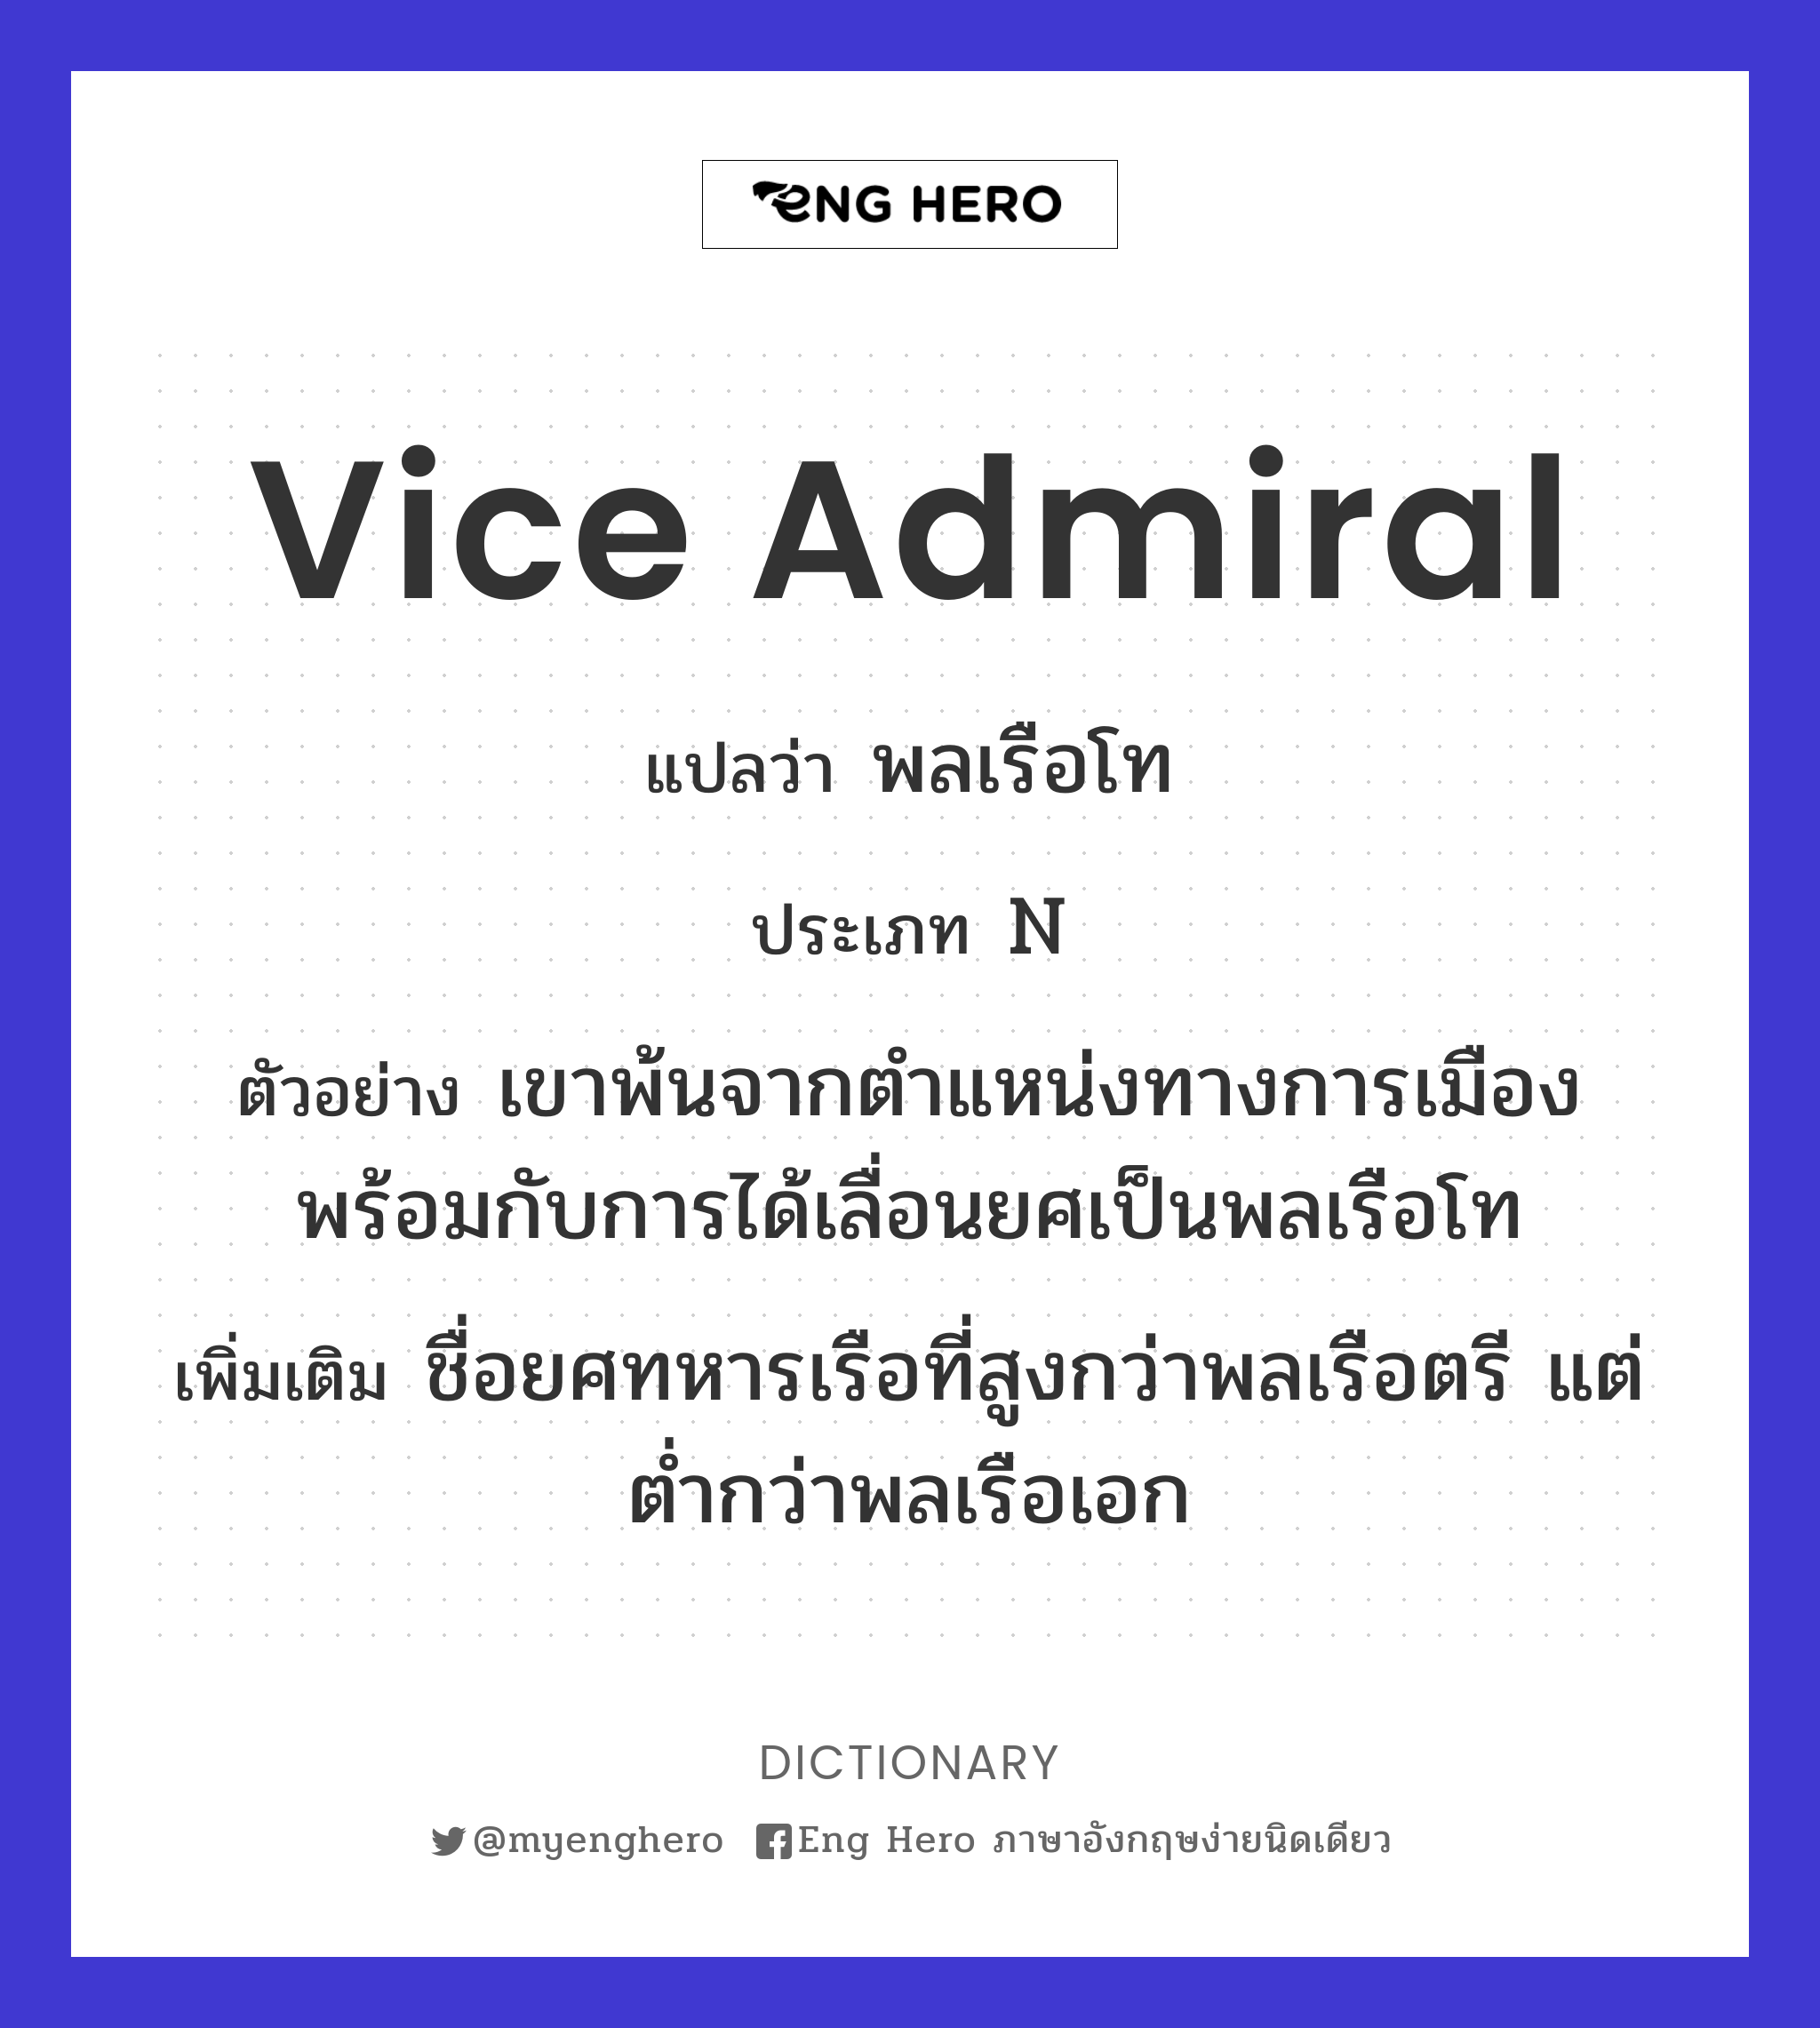 Vice Admiral